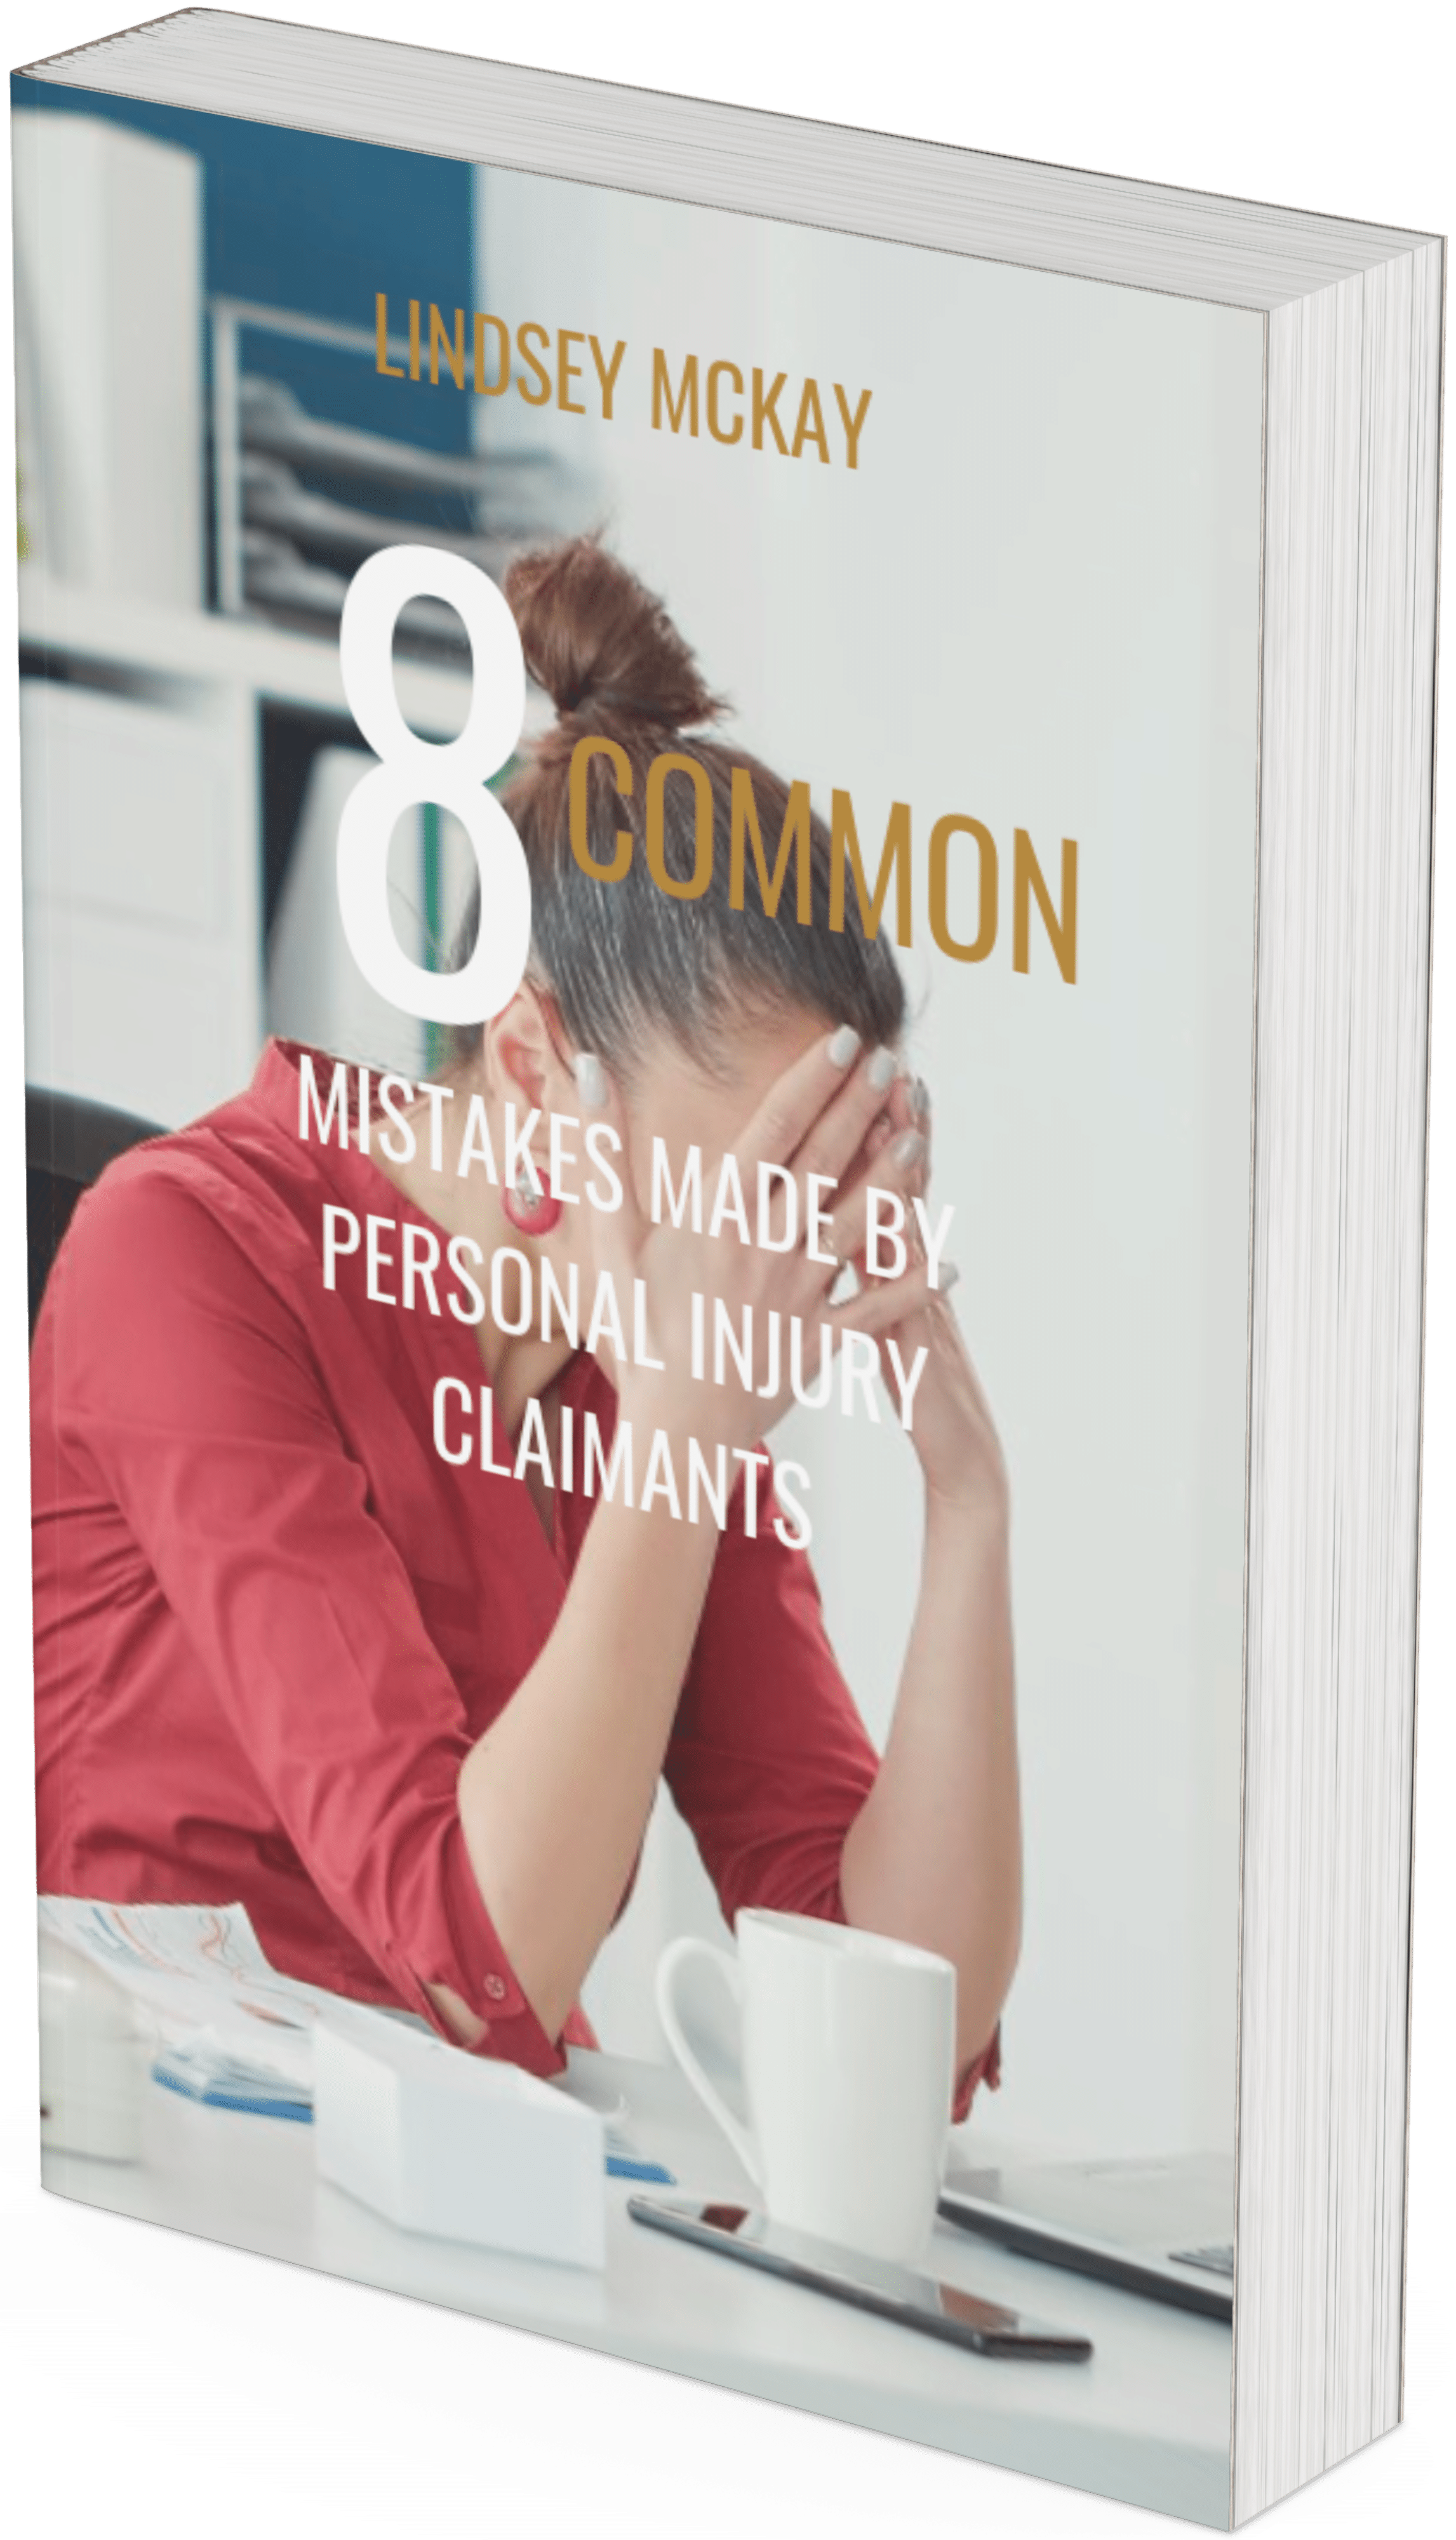 8 Common Mistakes Made by Personal Injury Claimants​